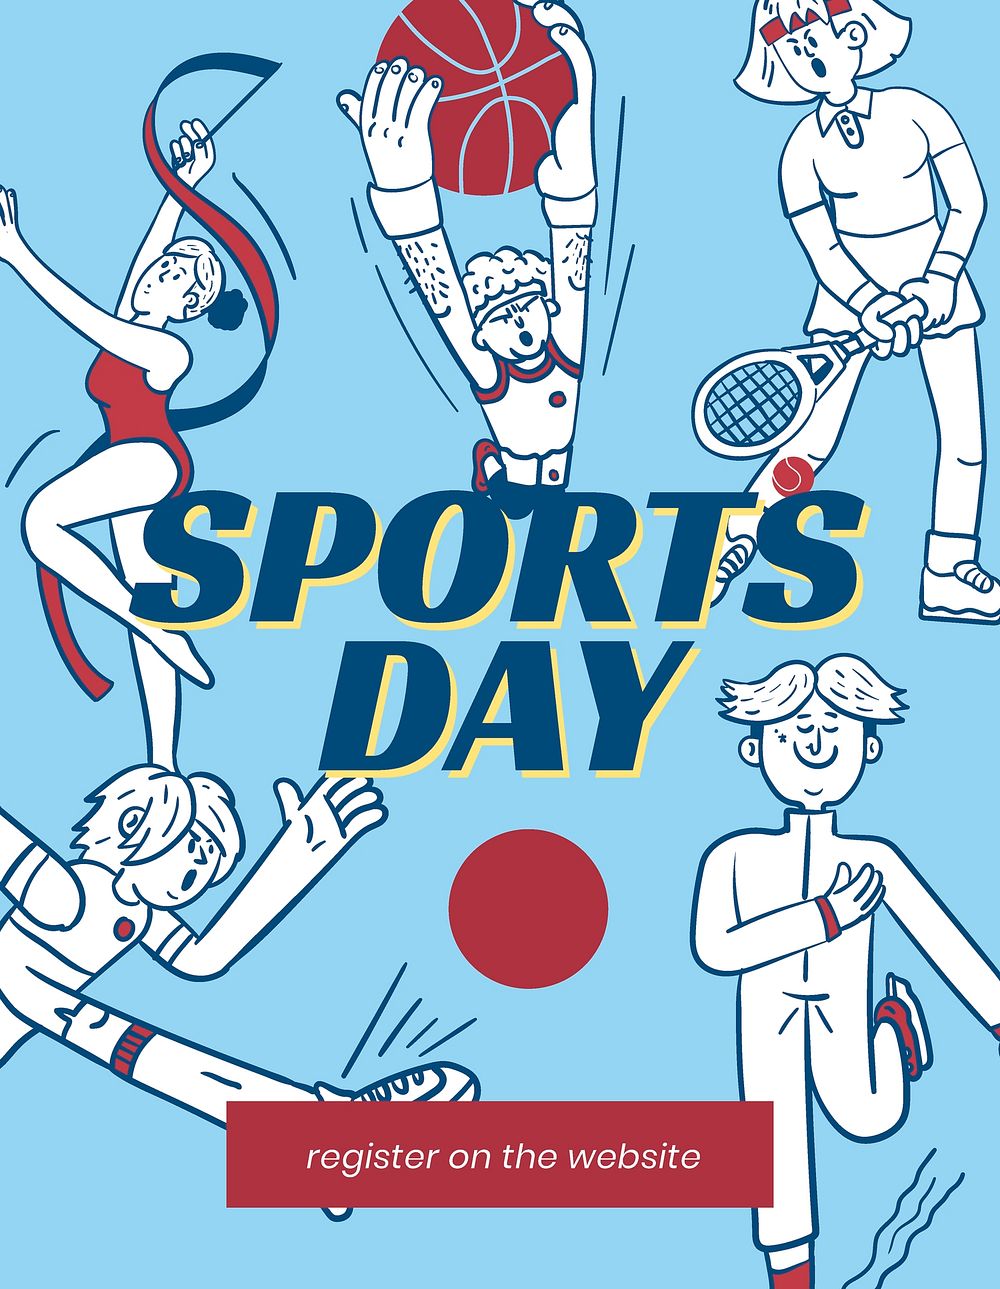 Sports day flyer template, cute athlete illustration psd